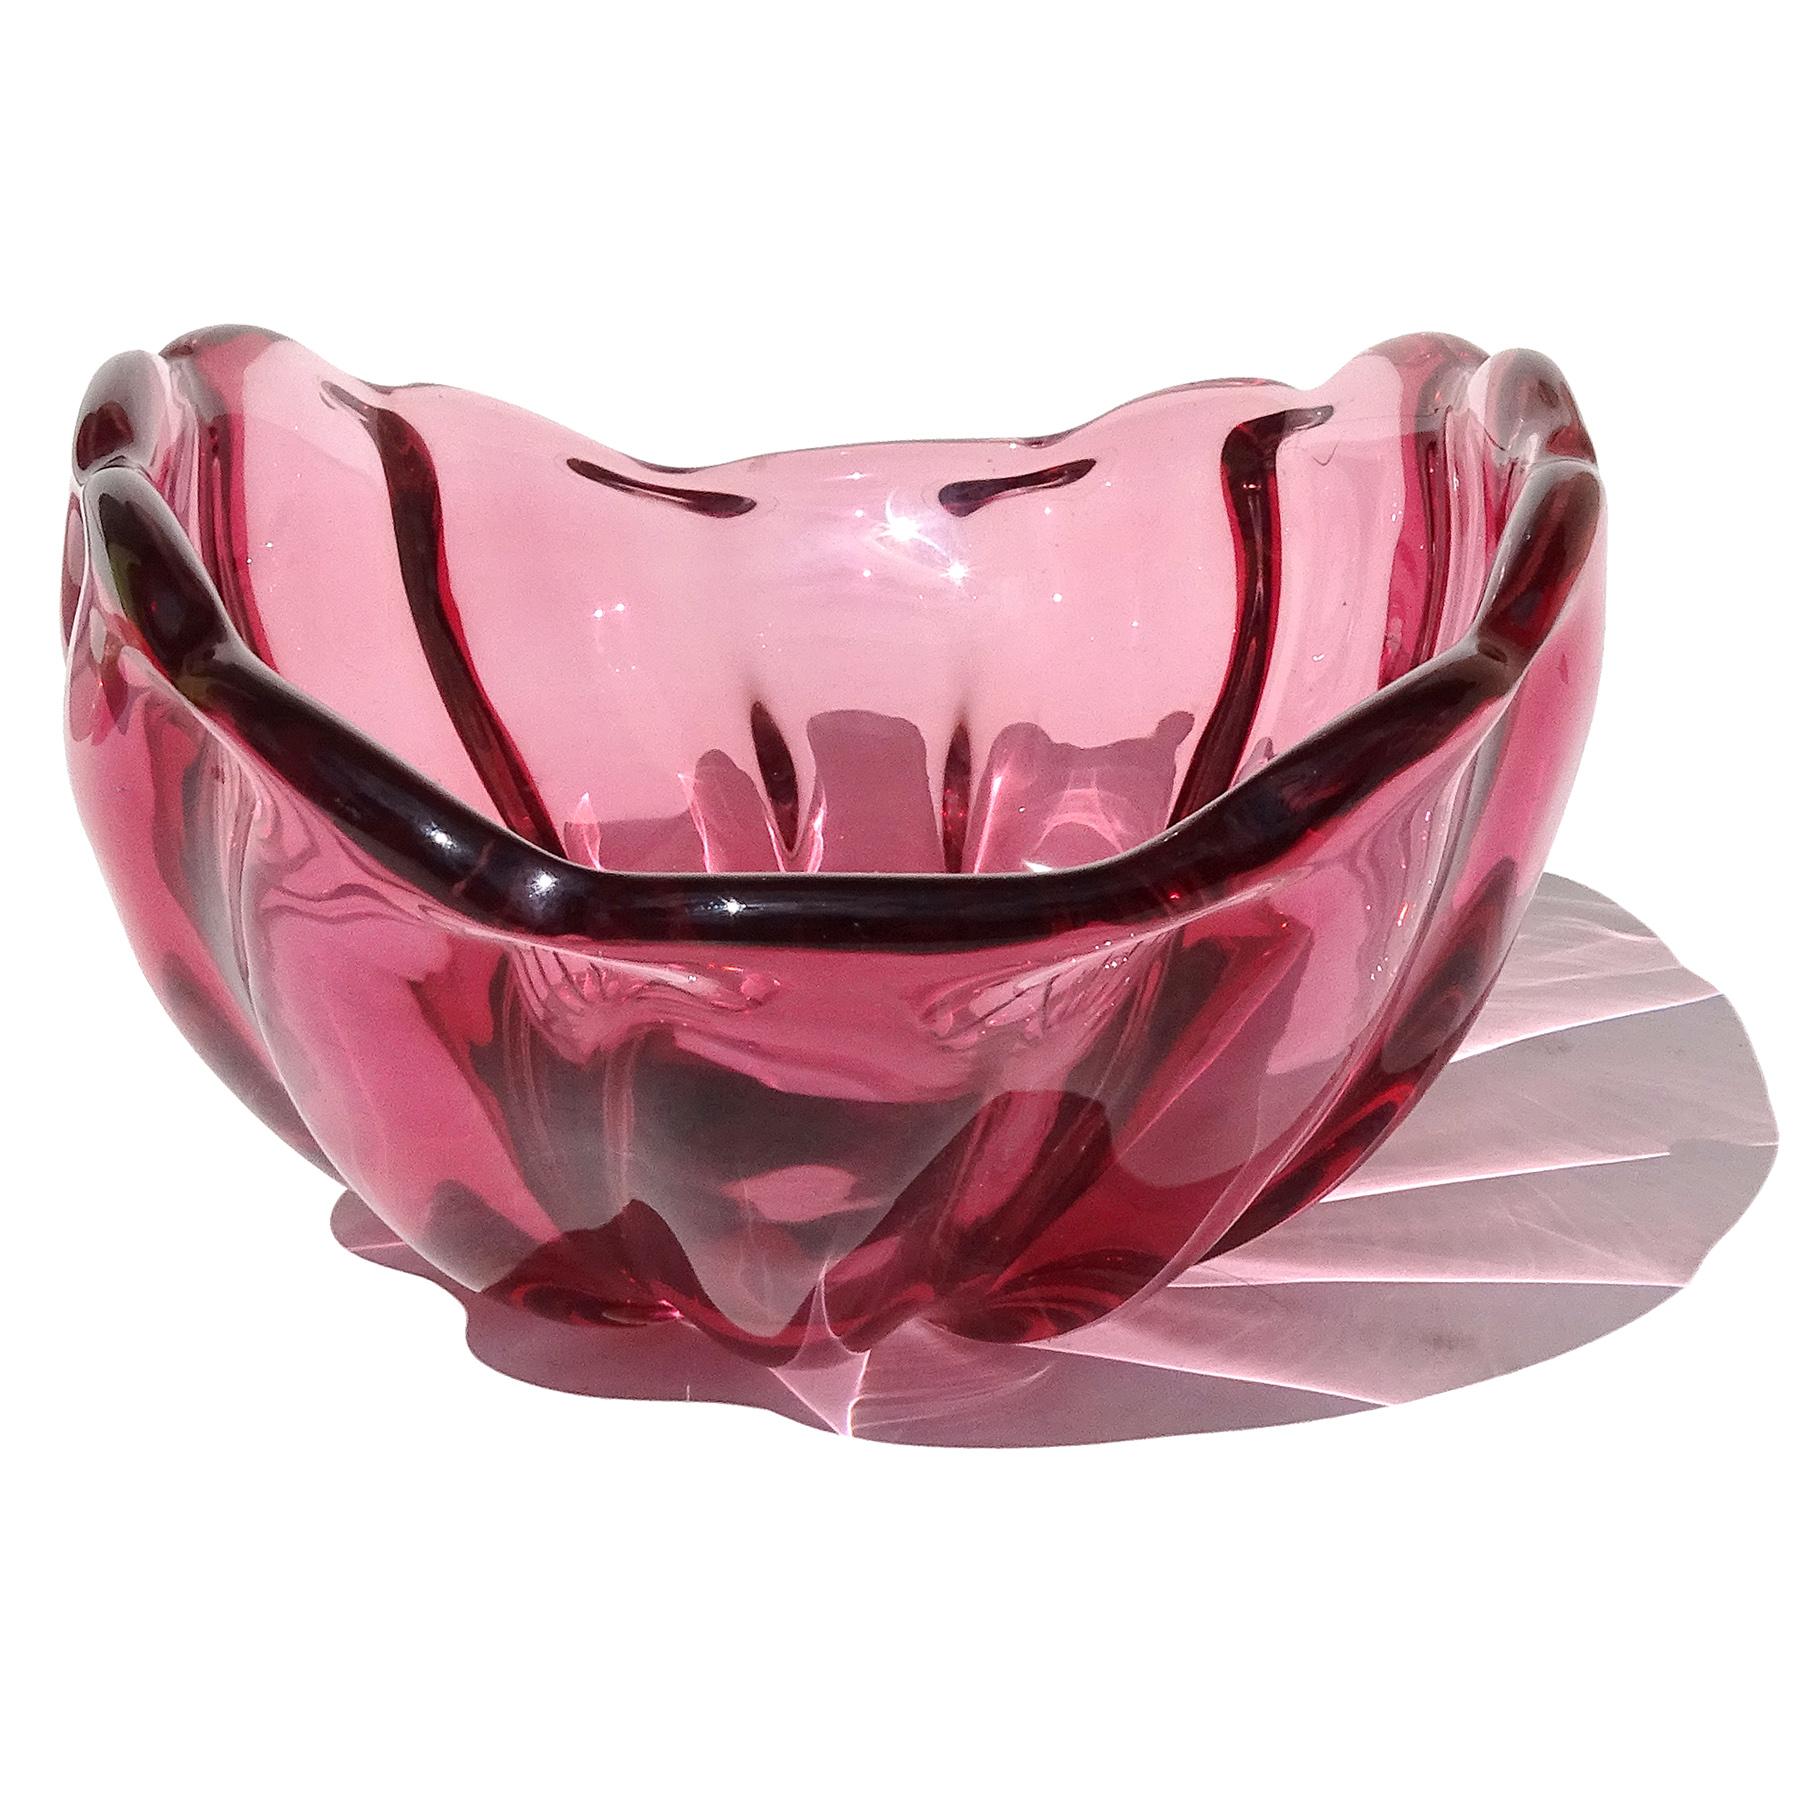 Alfredo Barbini Murano Sommerso Pink Italian Art Glass Fruit Bowl Centerpiece In Good Condition For Sale In Kissimmee, FL